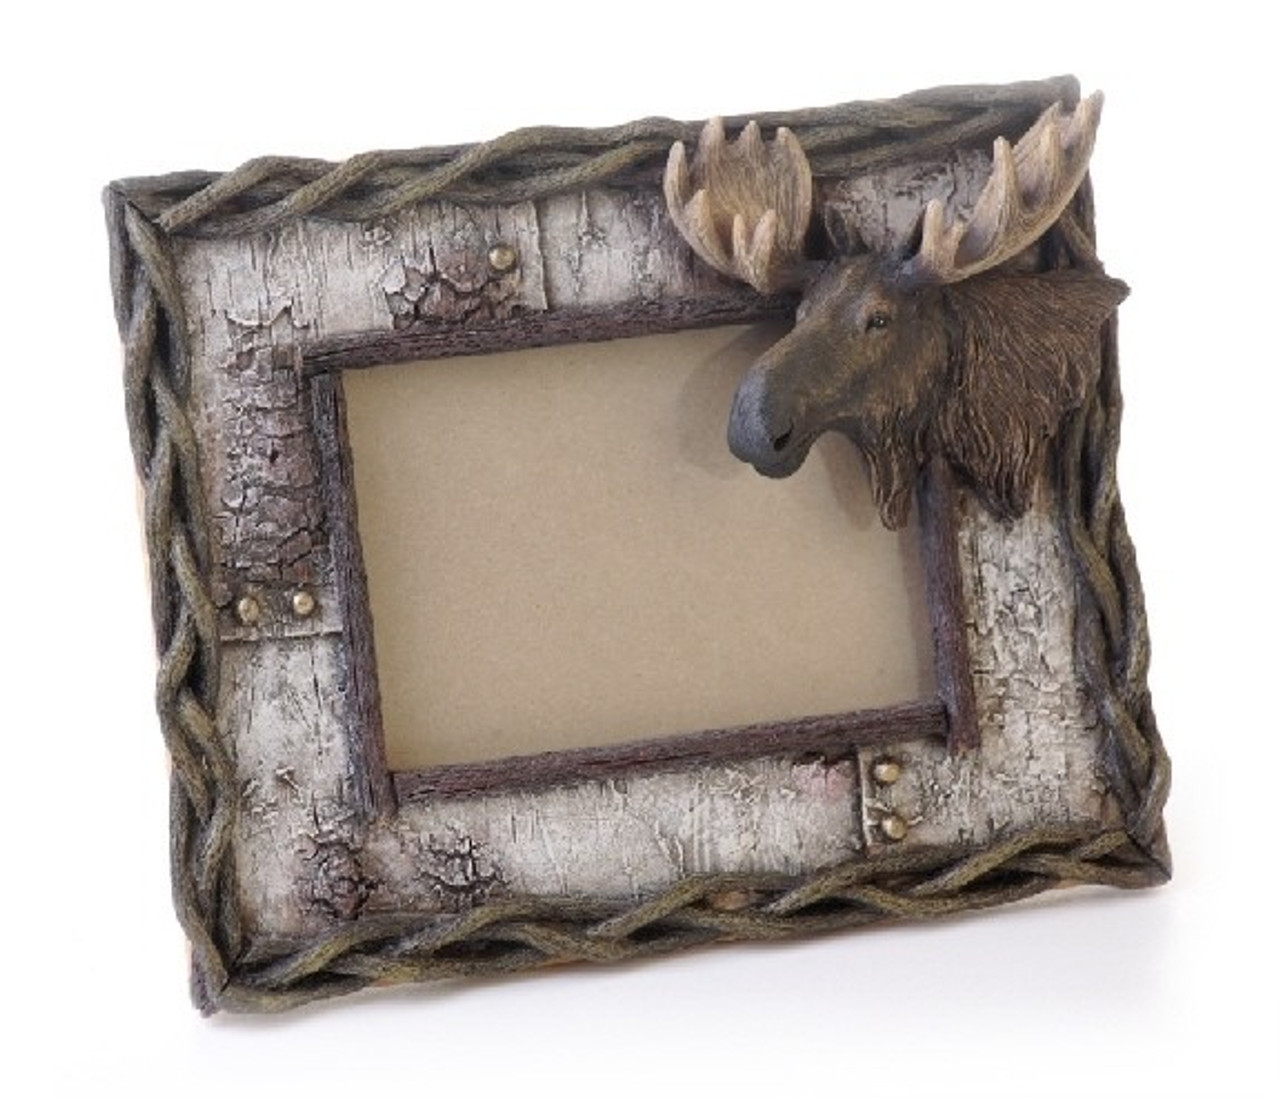  Moose art rustic Look frame hold a 4 x 6 Photo 9 x 11 overall